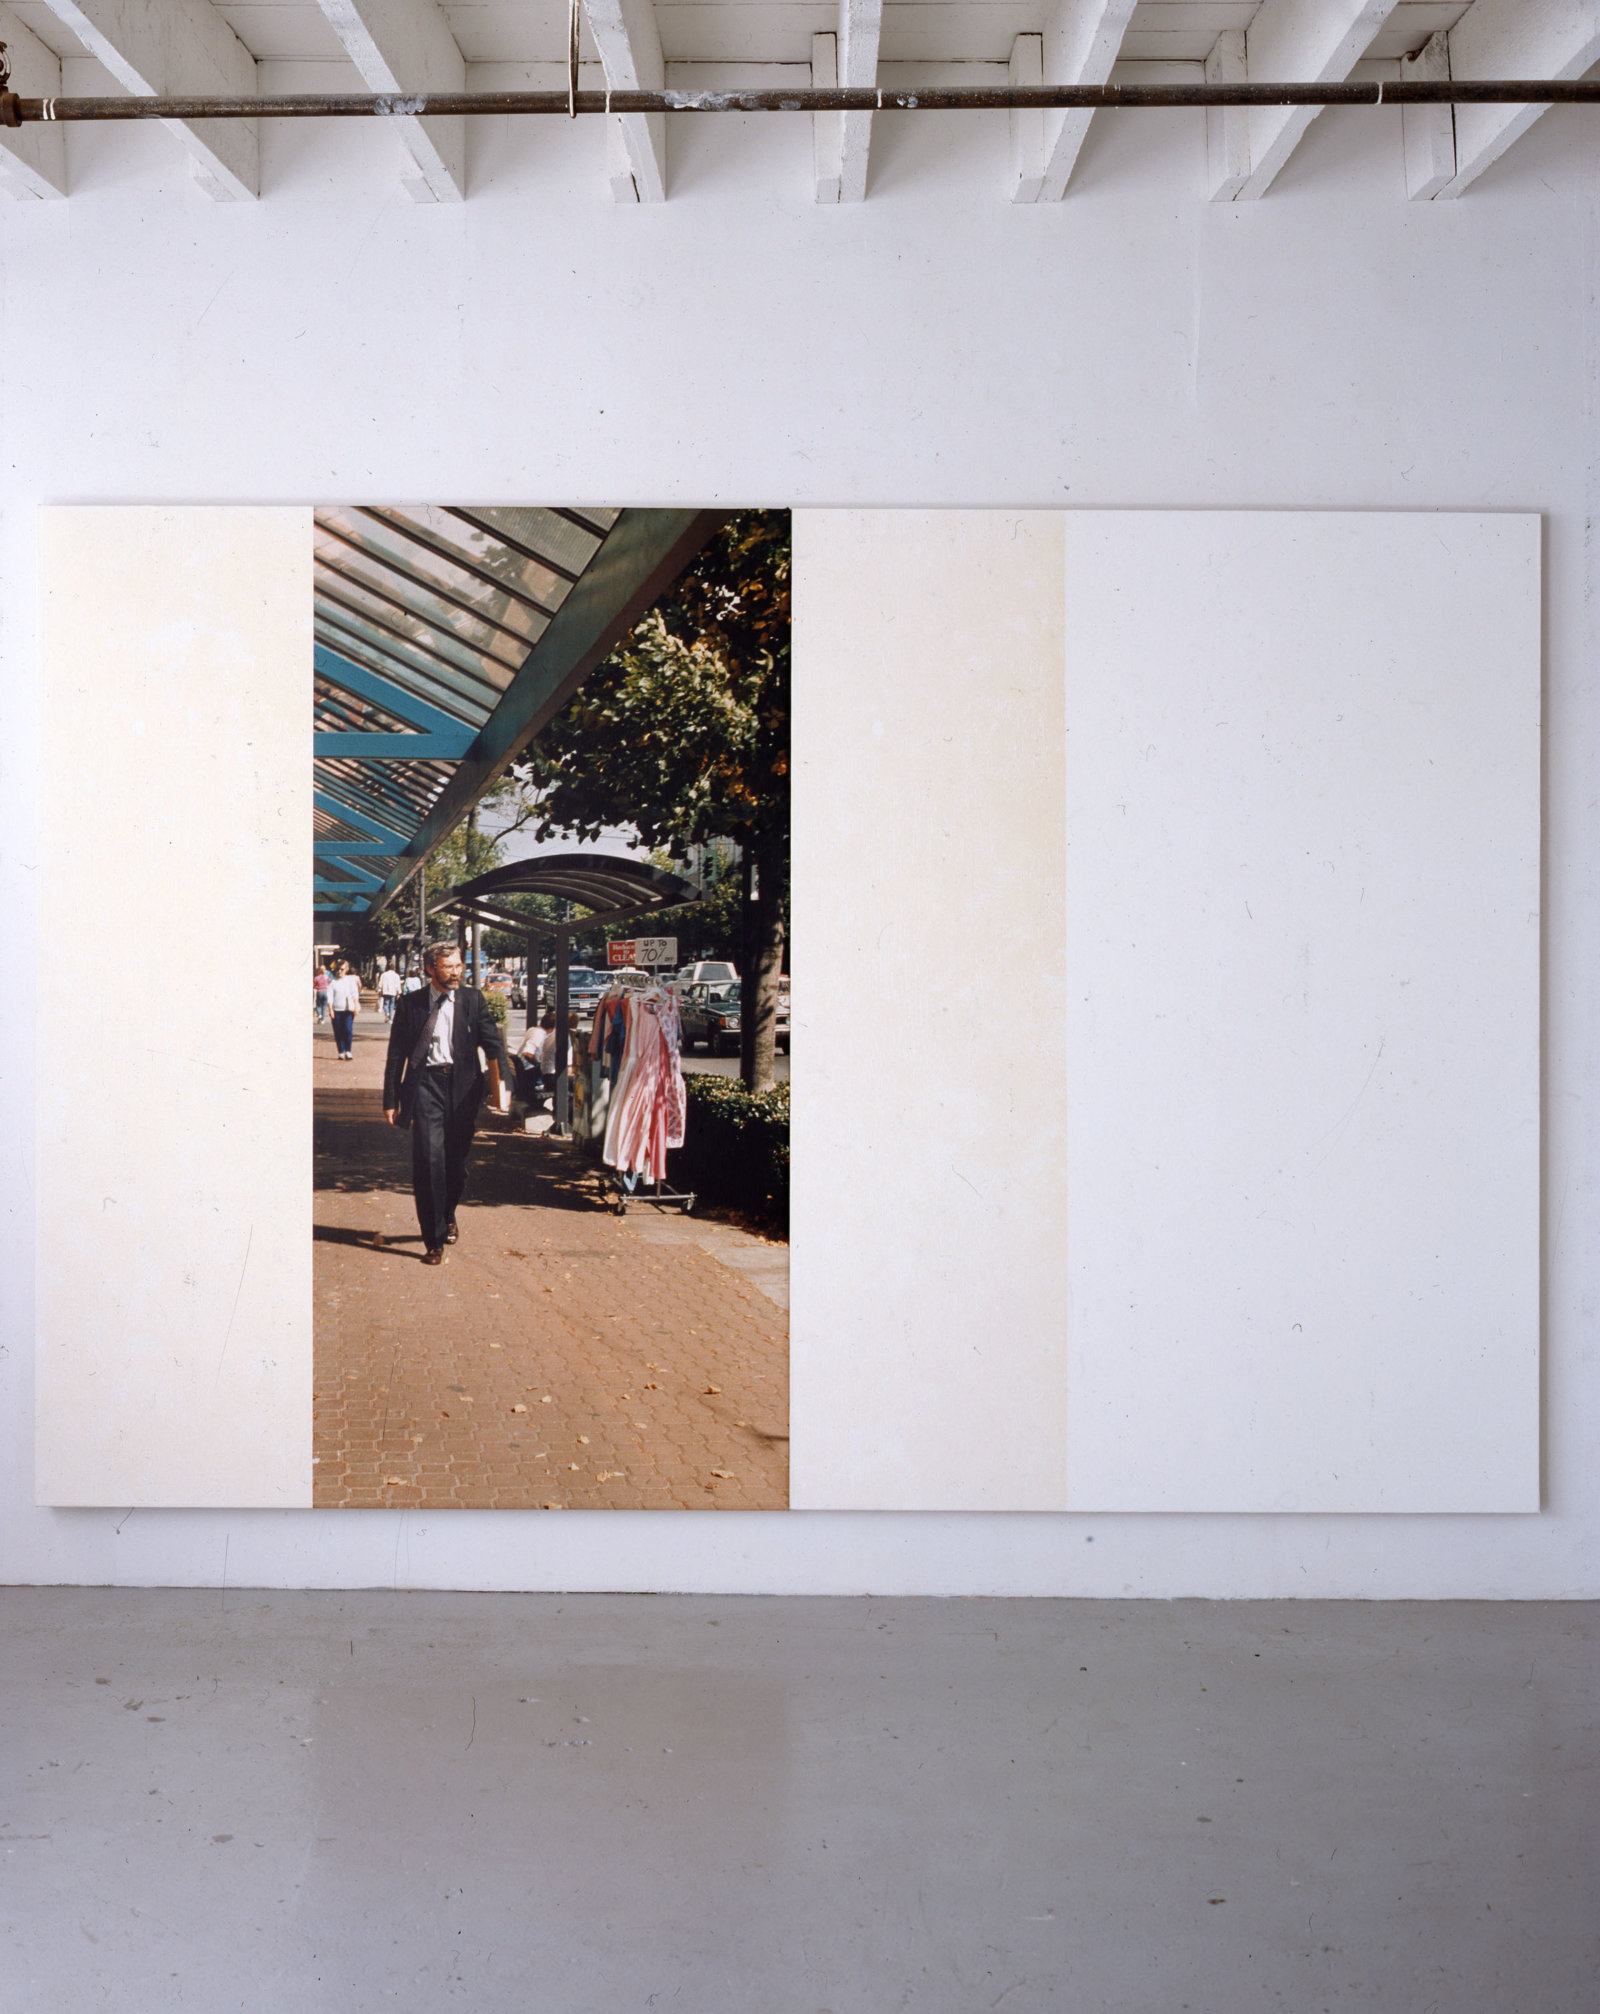 Ian Wallace, In the Street (George), 1988, photolaminate with acrylic and ink monoprint on canvas, 96 x 96 in. (244 x 244 cm)